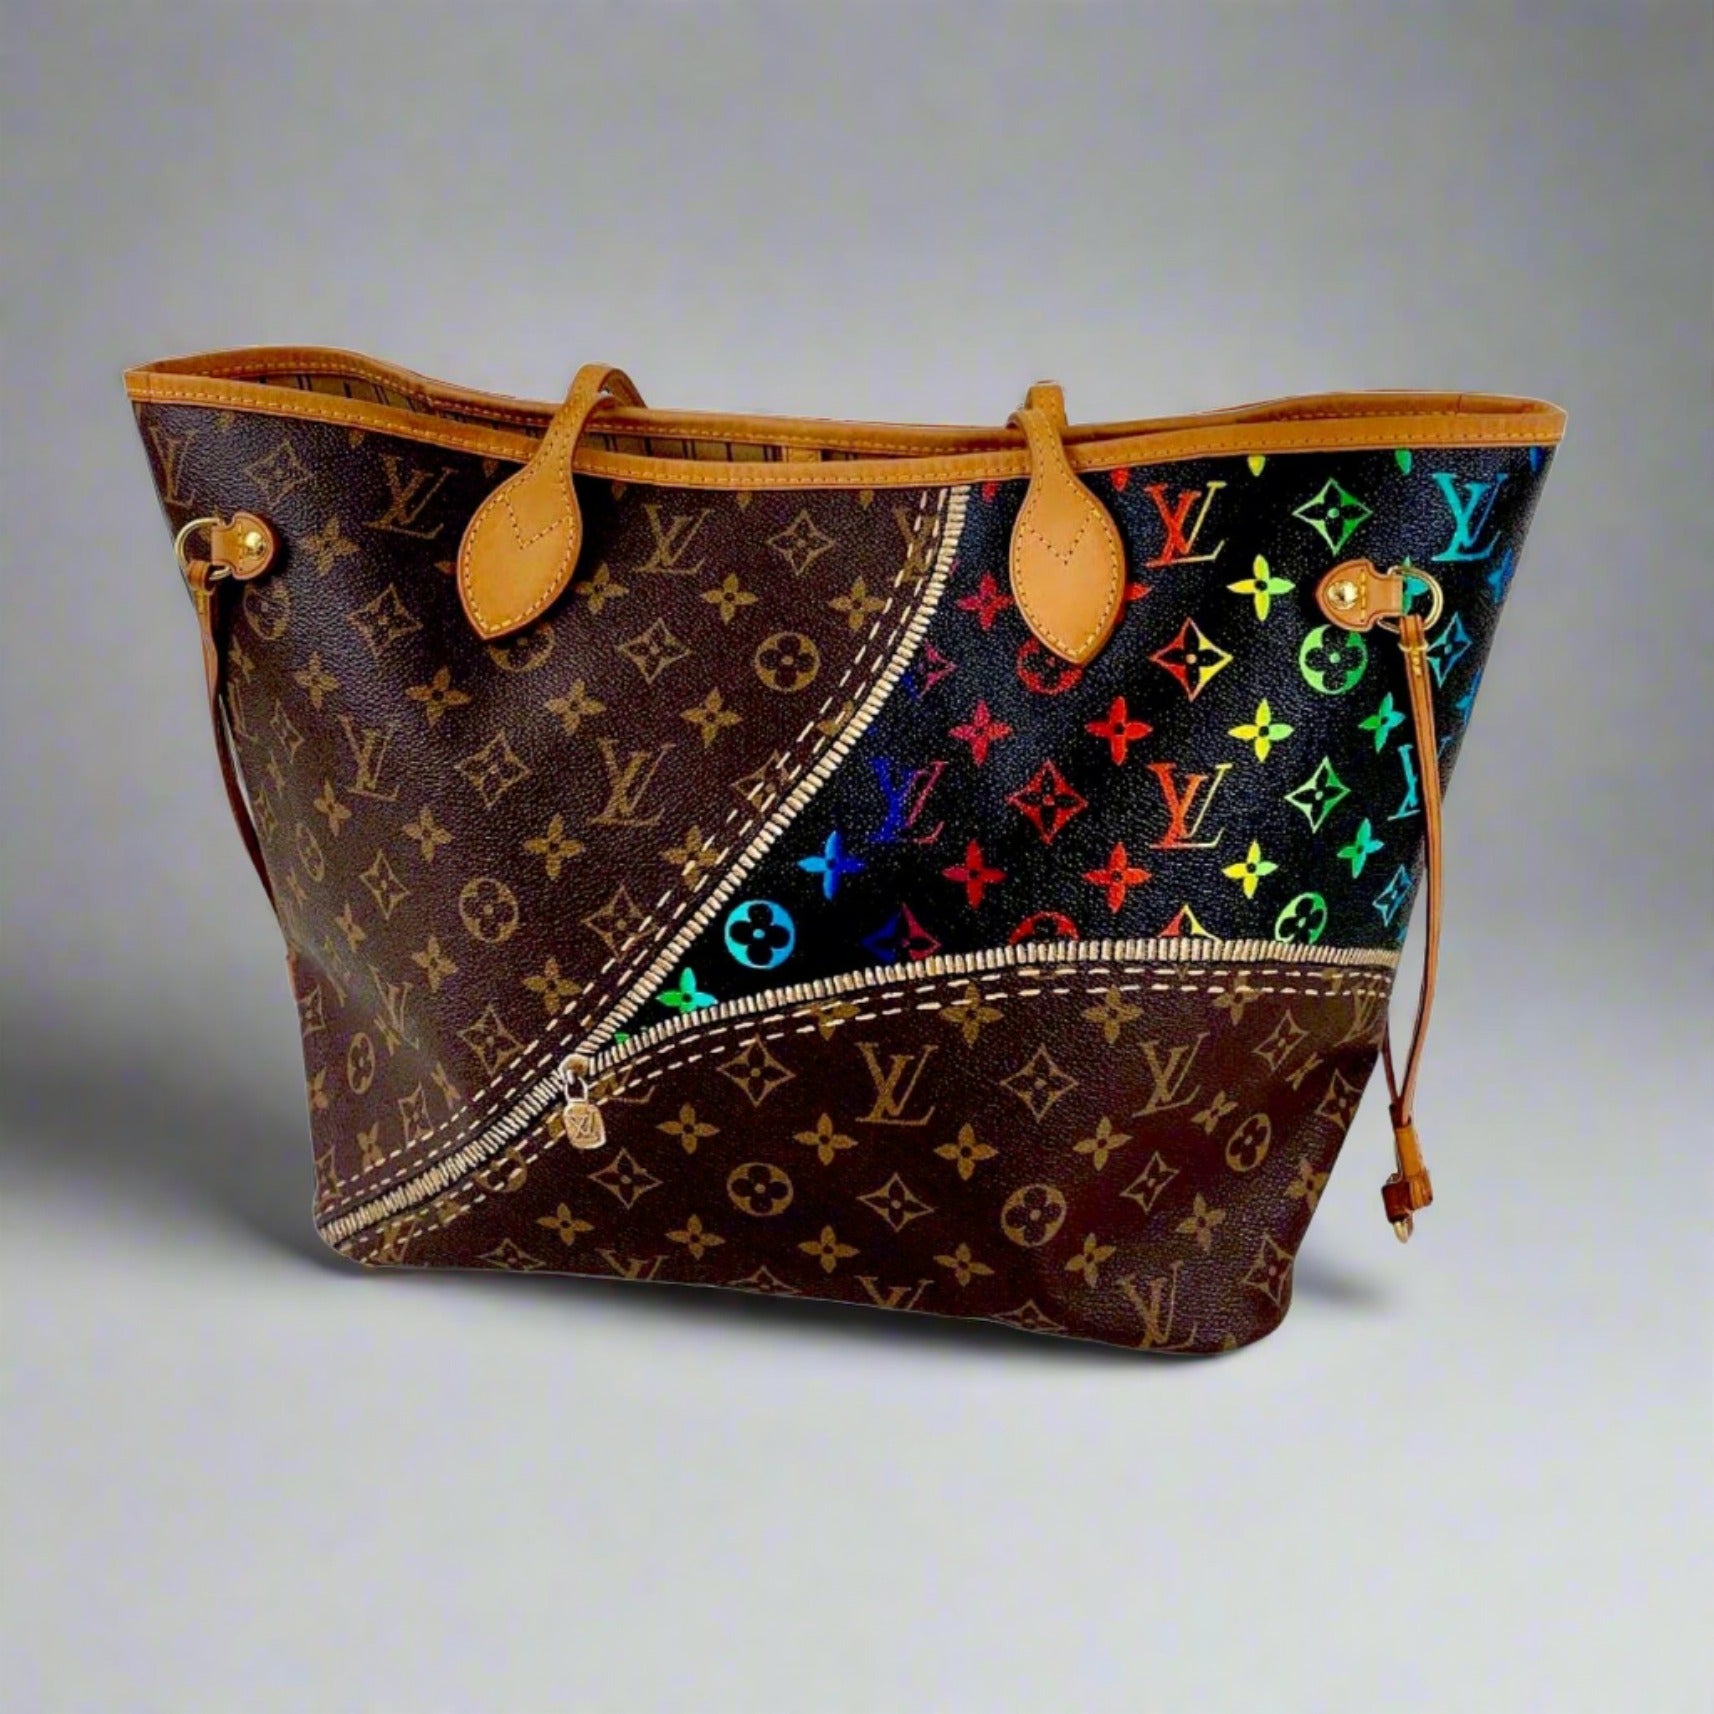 Louis Vuitton Neverfull classic handbag (including $24 for shipping)